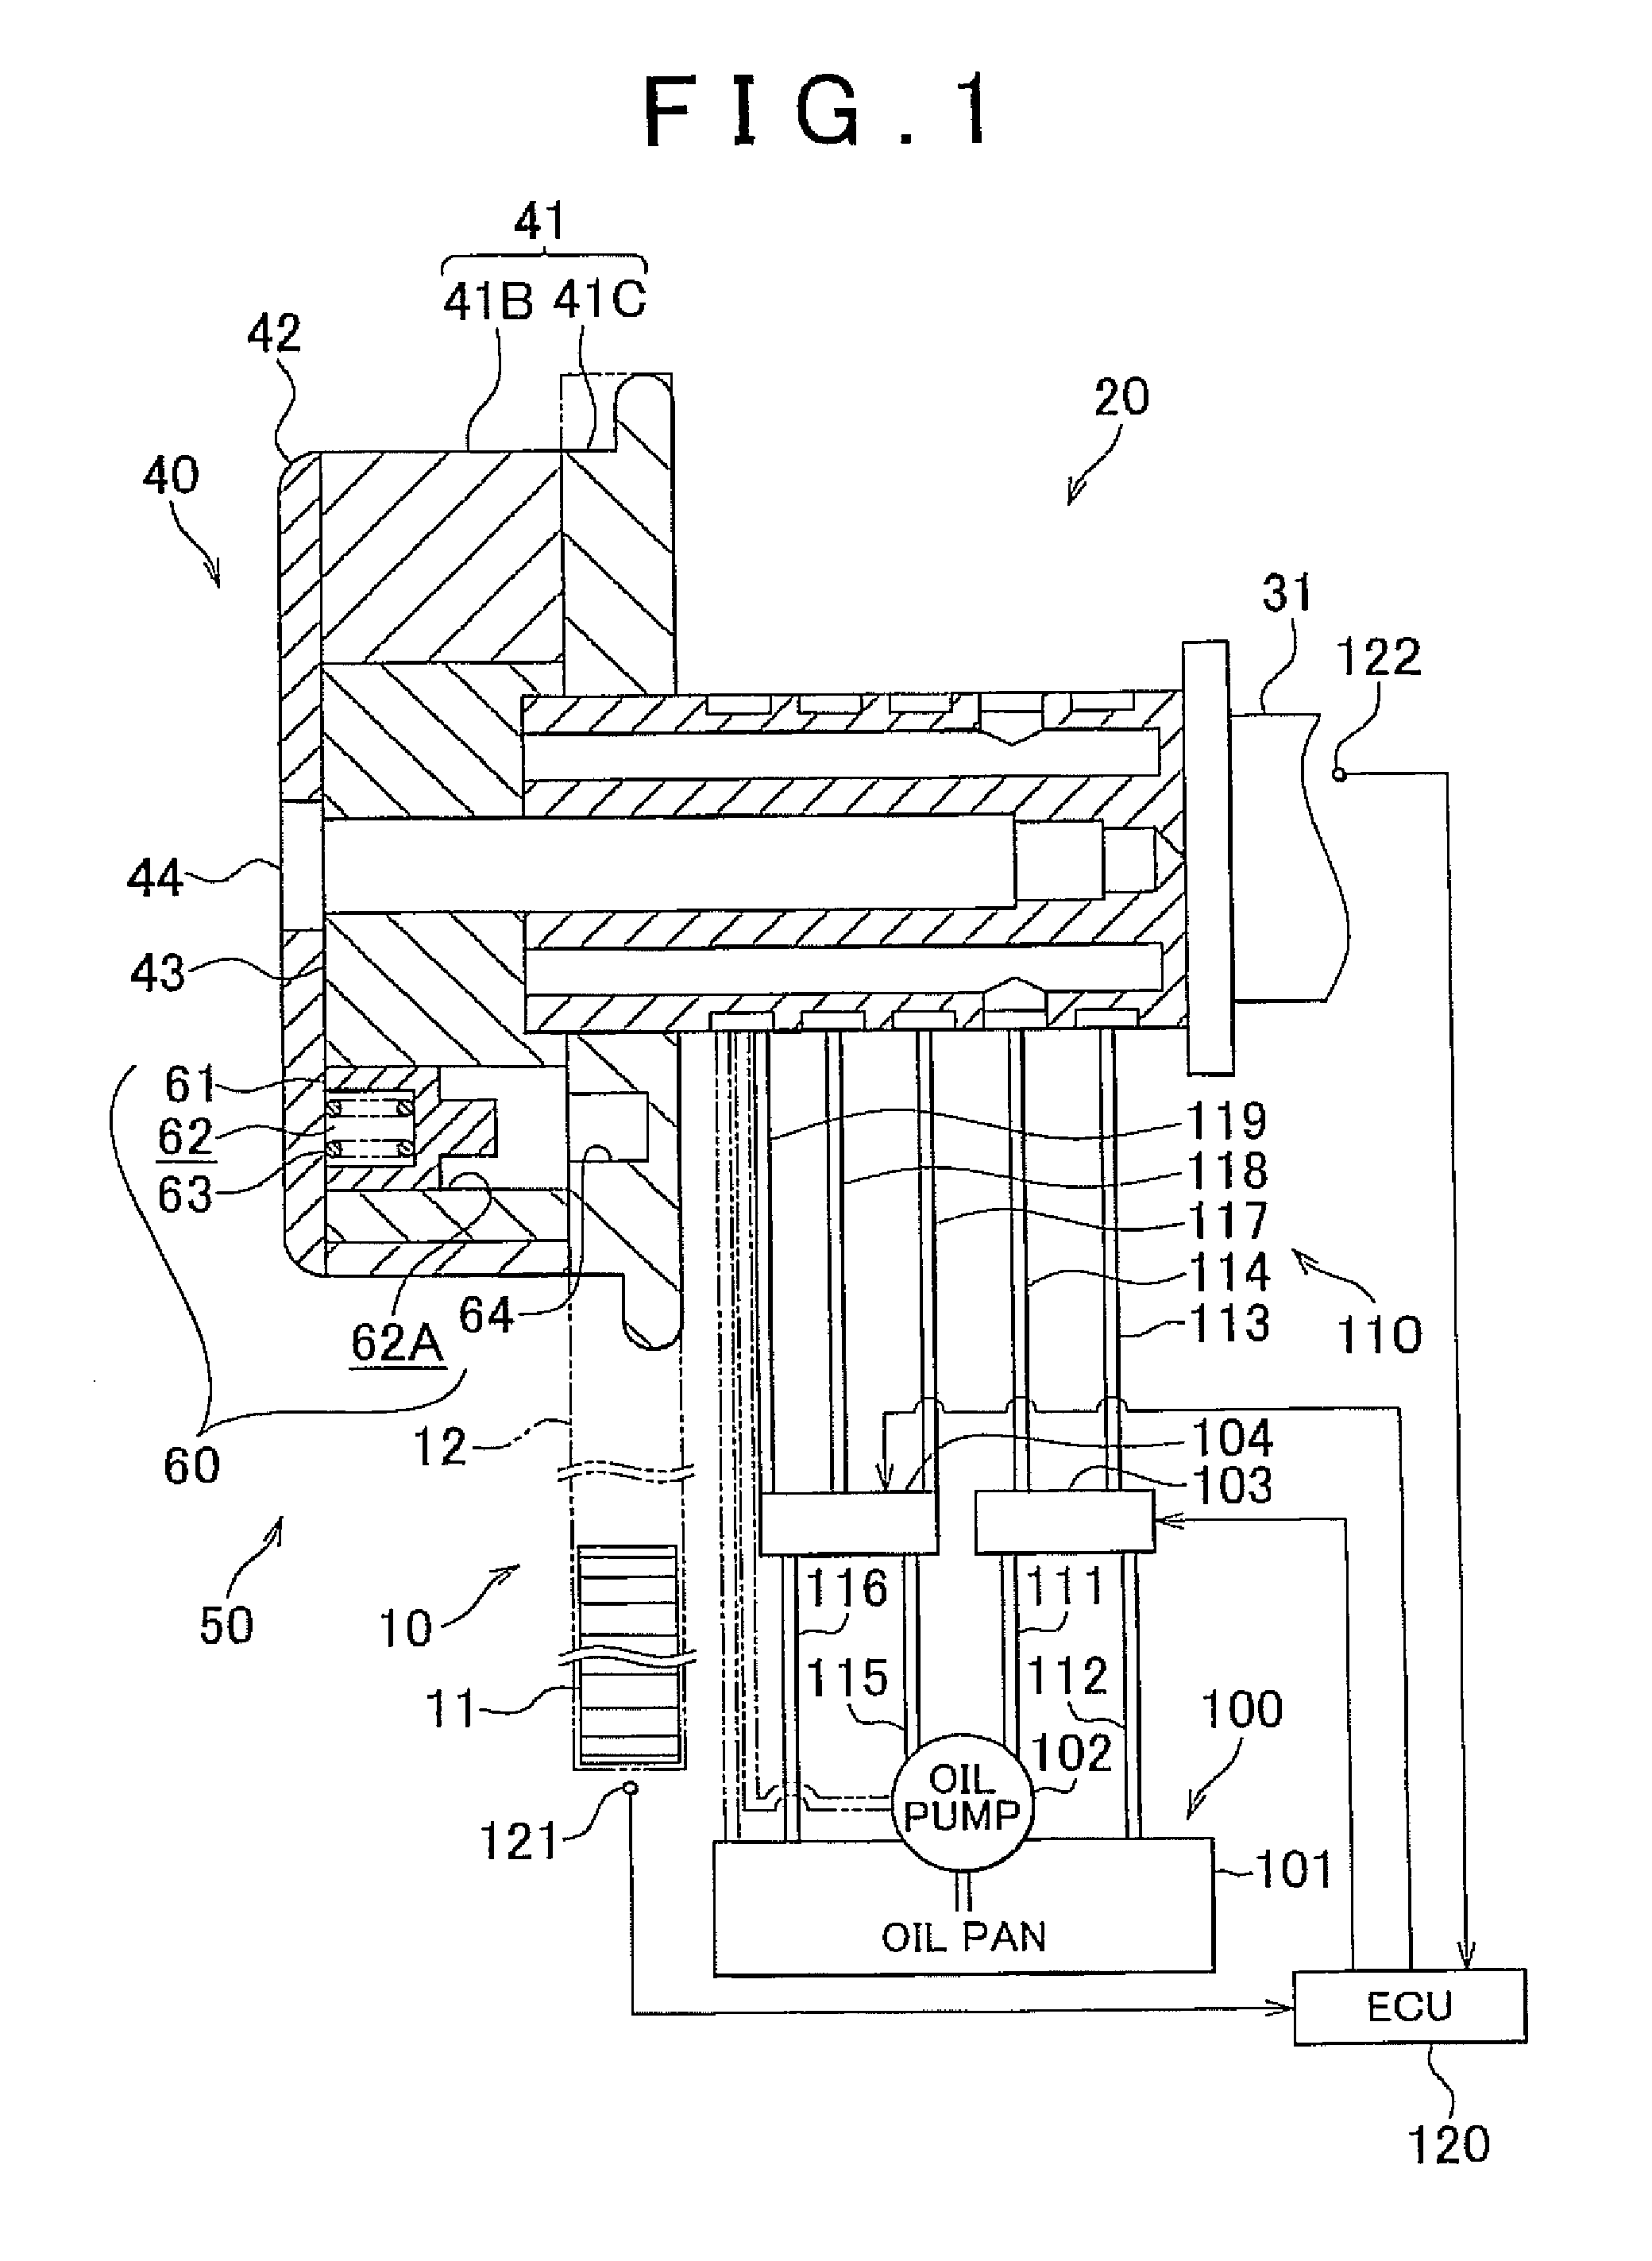 Variable valve timing apparatus for internal combustion engine